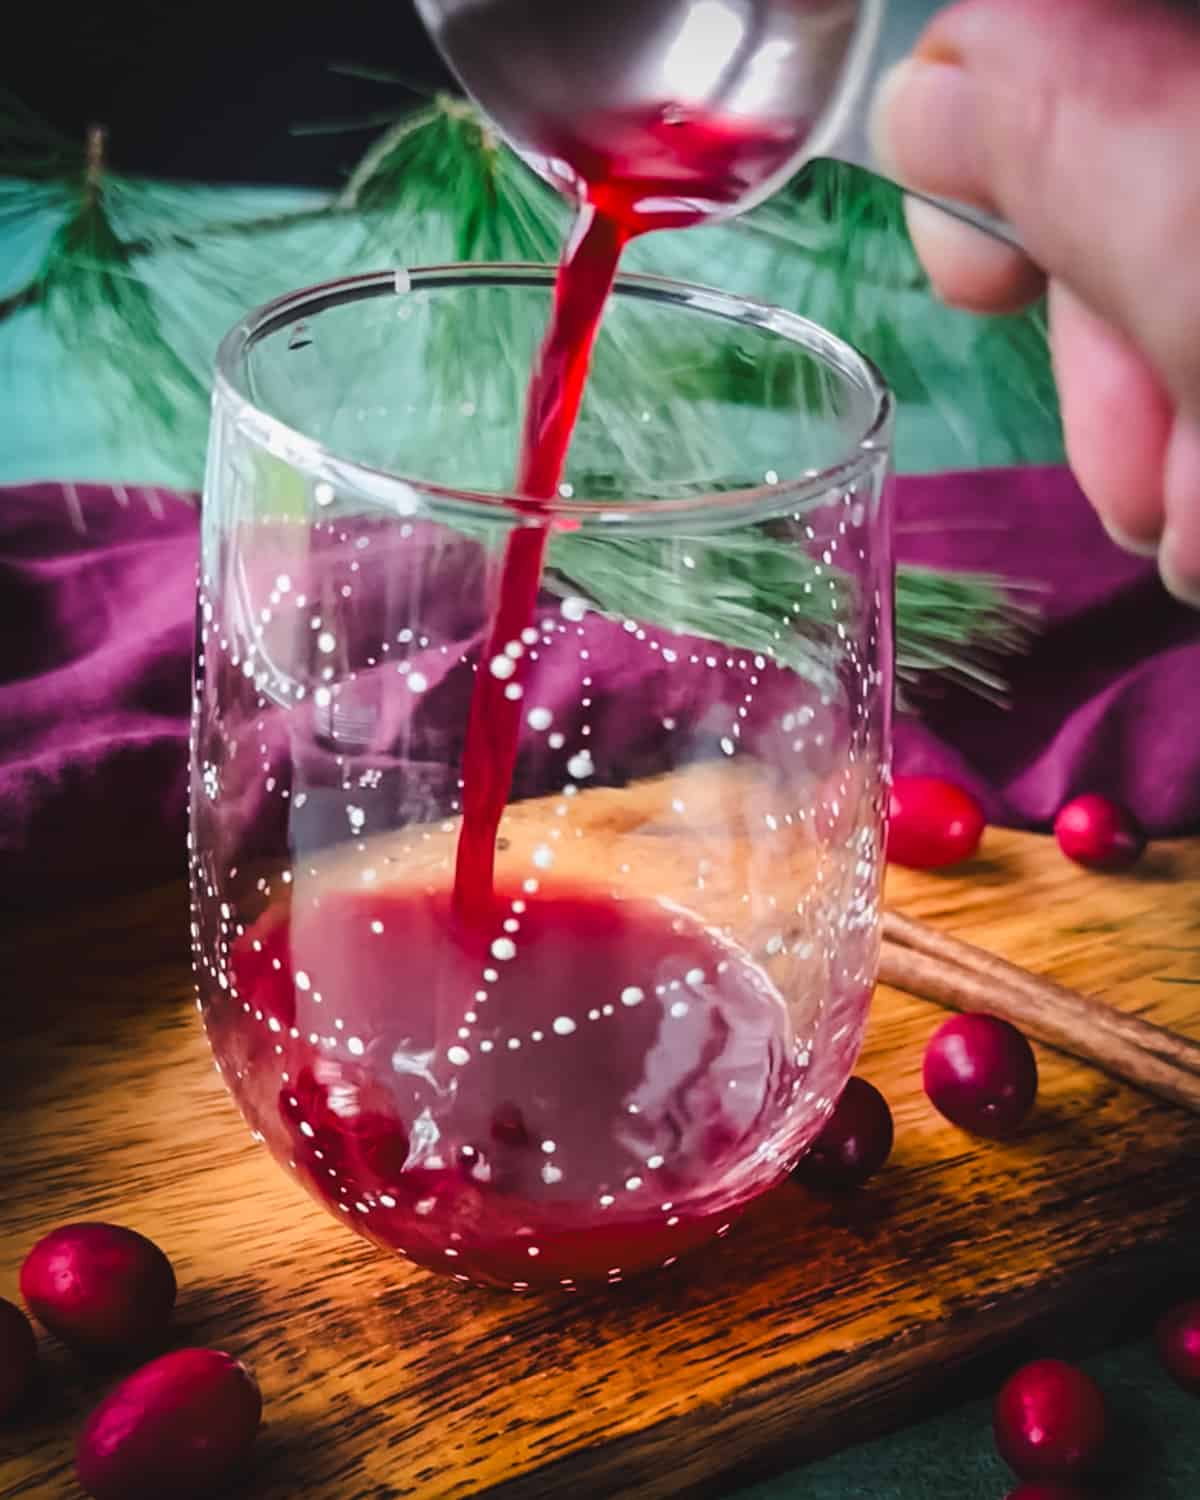 Finished spiced cranberry syrup pouring into a stemless wine glass with constellations on it, on a wood surface surrounded by red and green cloths and fresh whole cranberries. 